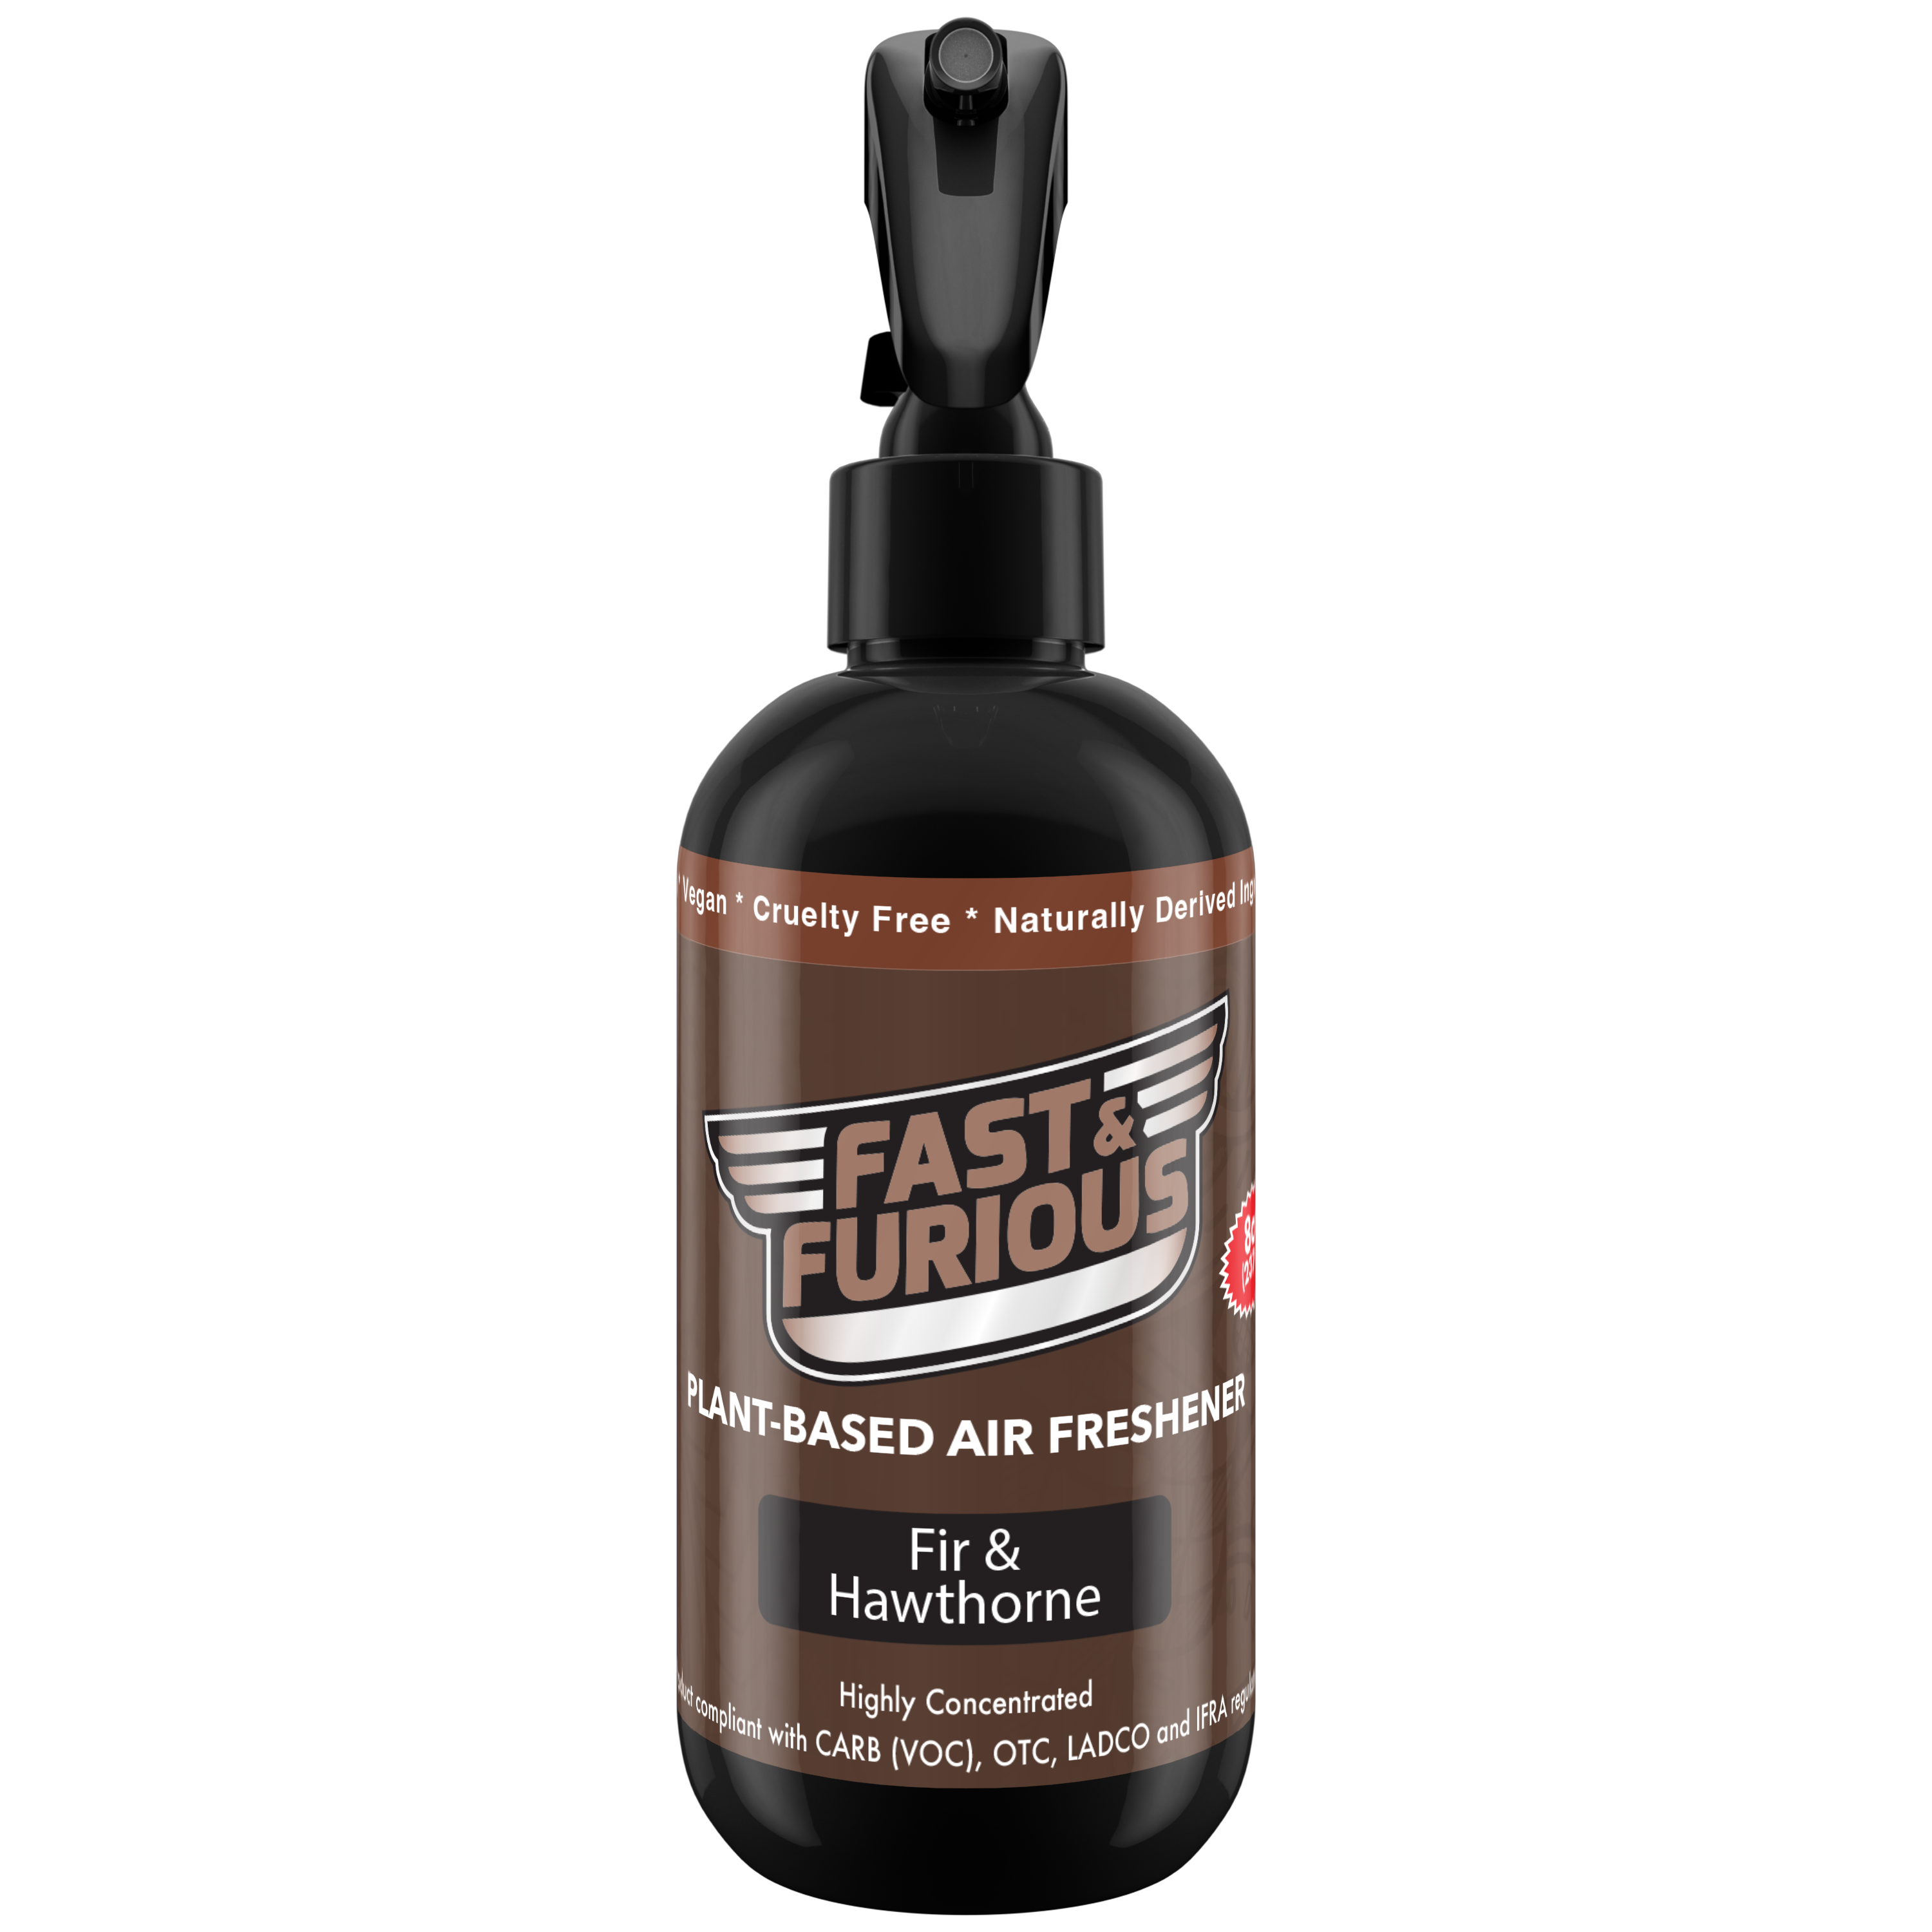 Fast and Furious Plant-Based Air Freshener - Fir & Hawthorne Scent